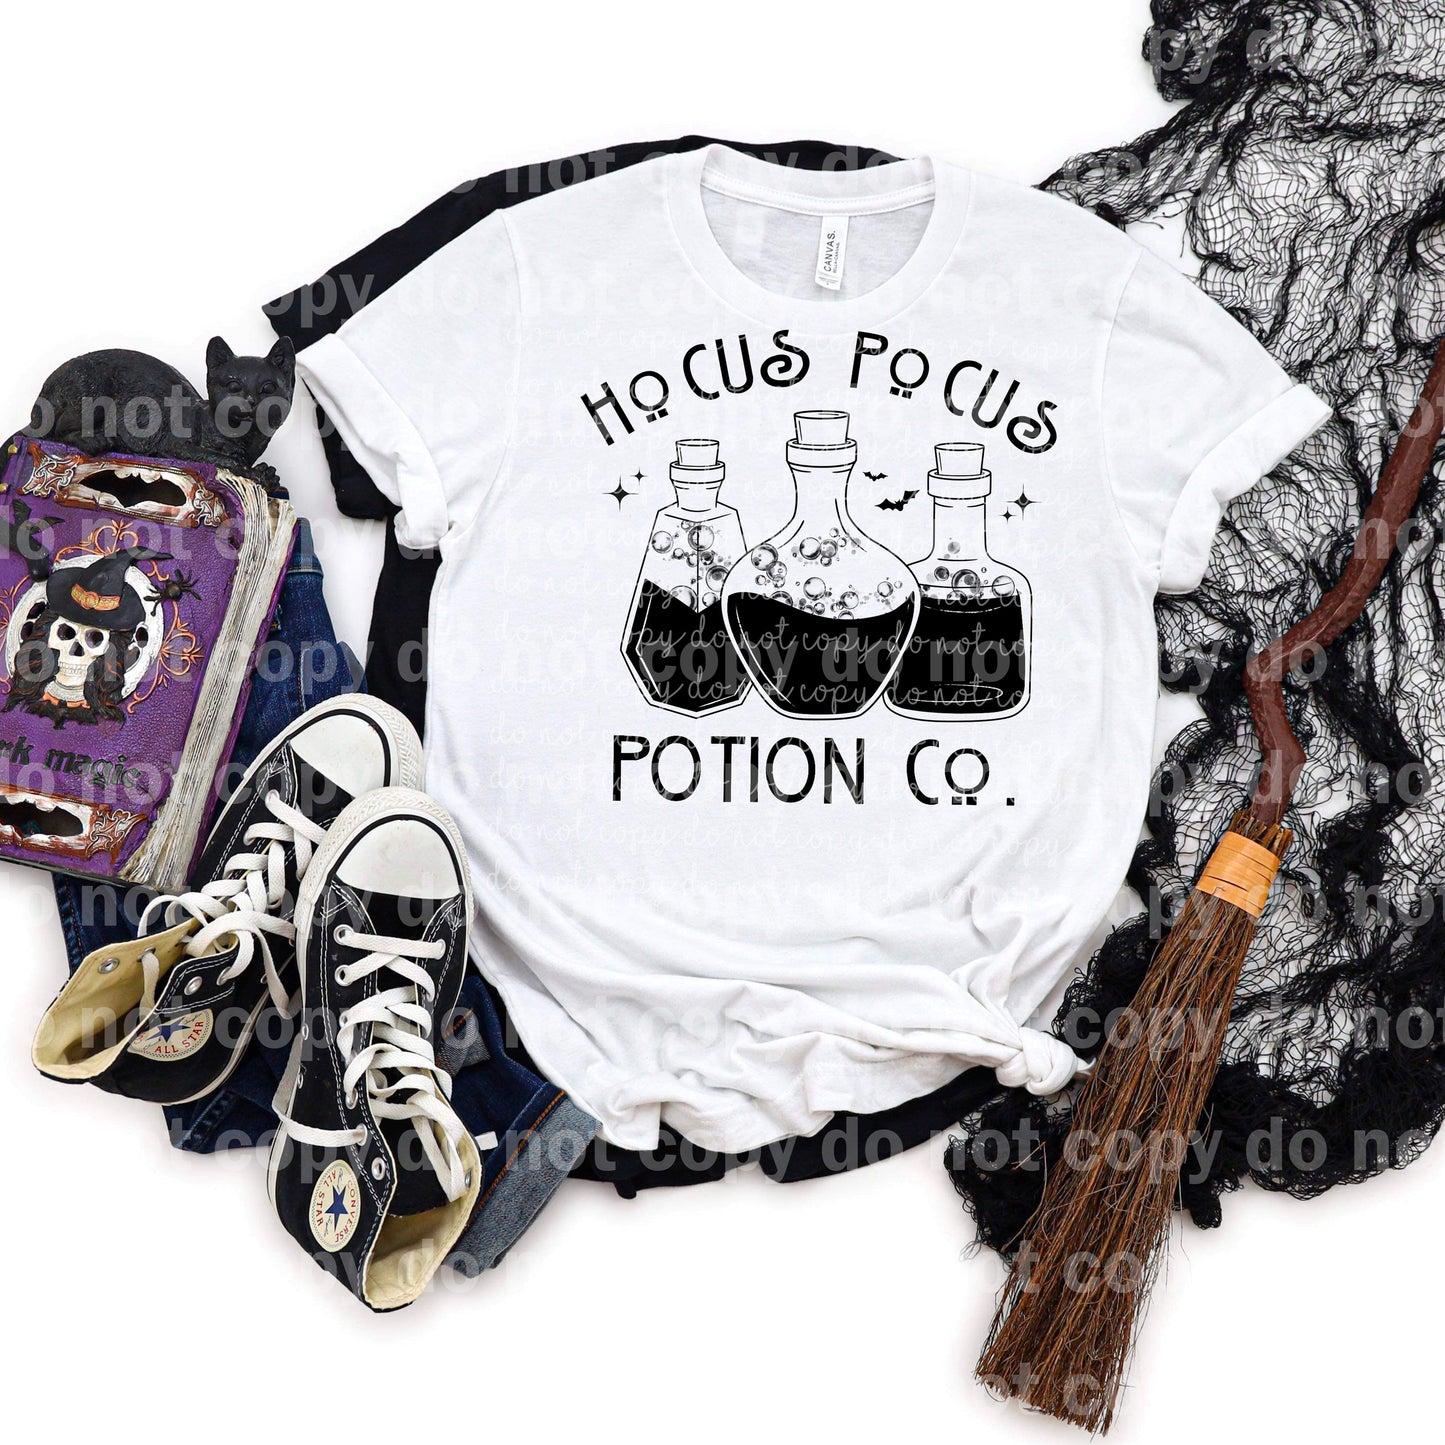 HP Potion Co. Full Color/One Color Dream Print or Sublimation Print